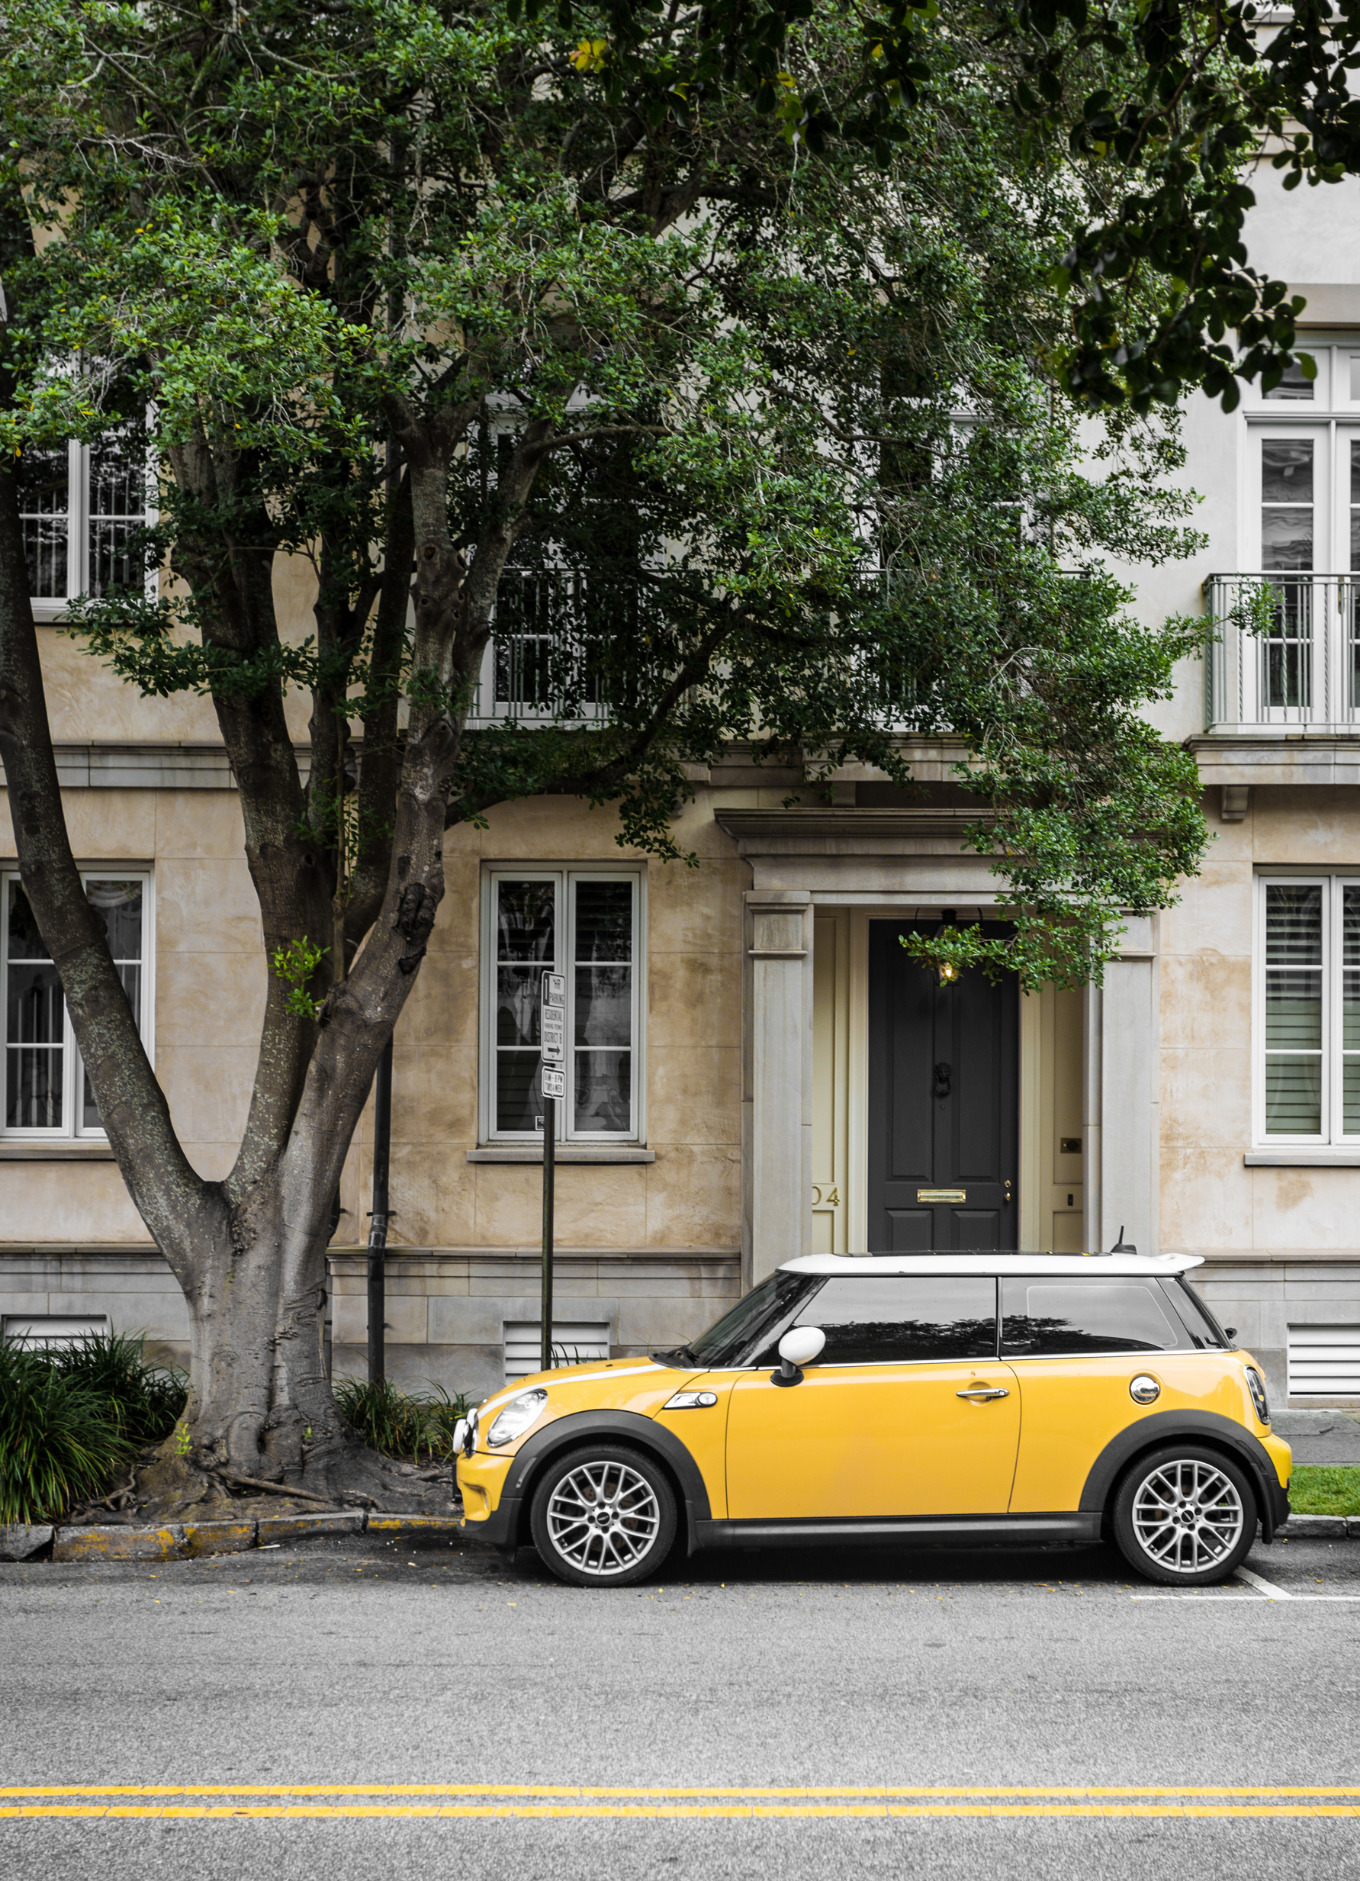 Photo of a yellow Mini Cooper car parked on street